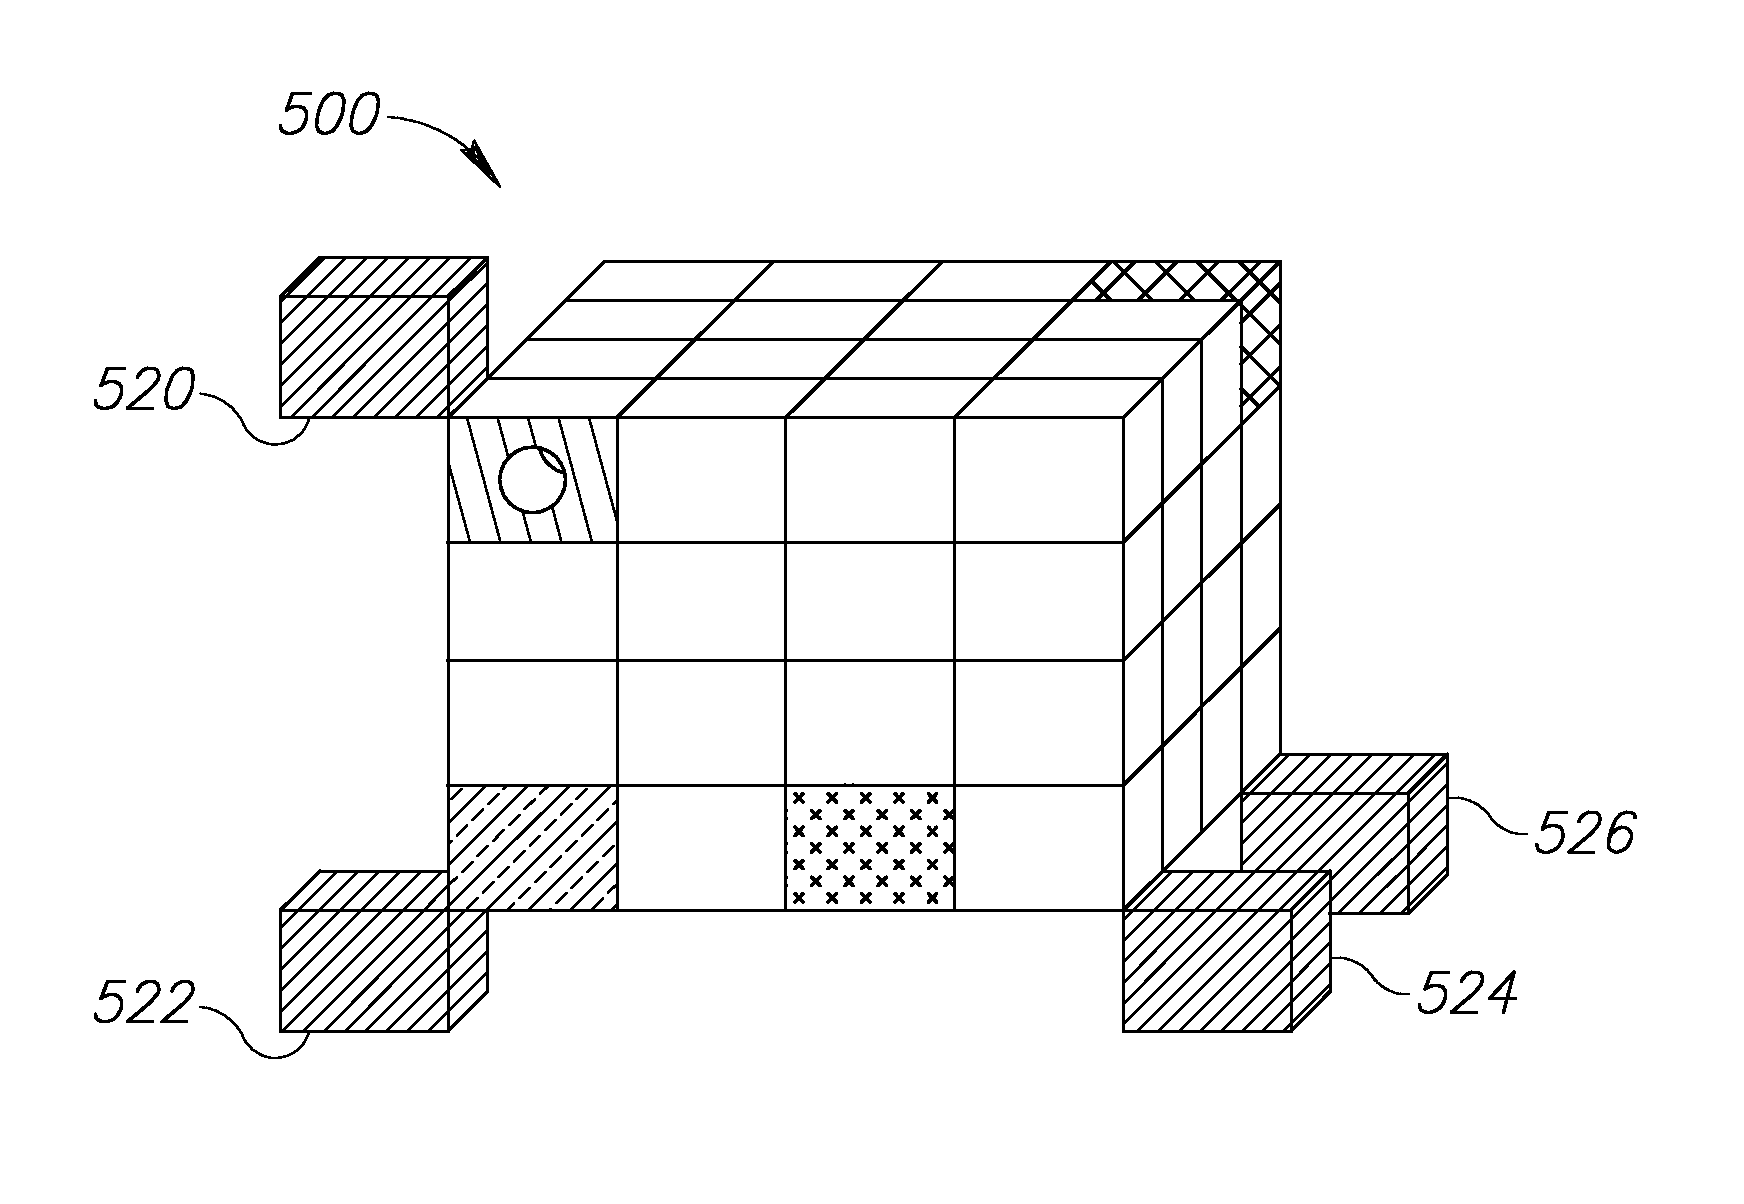 Encoding information in physical properties of an object